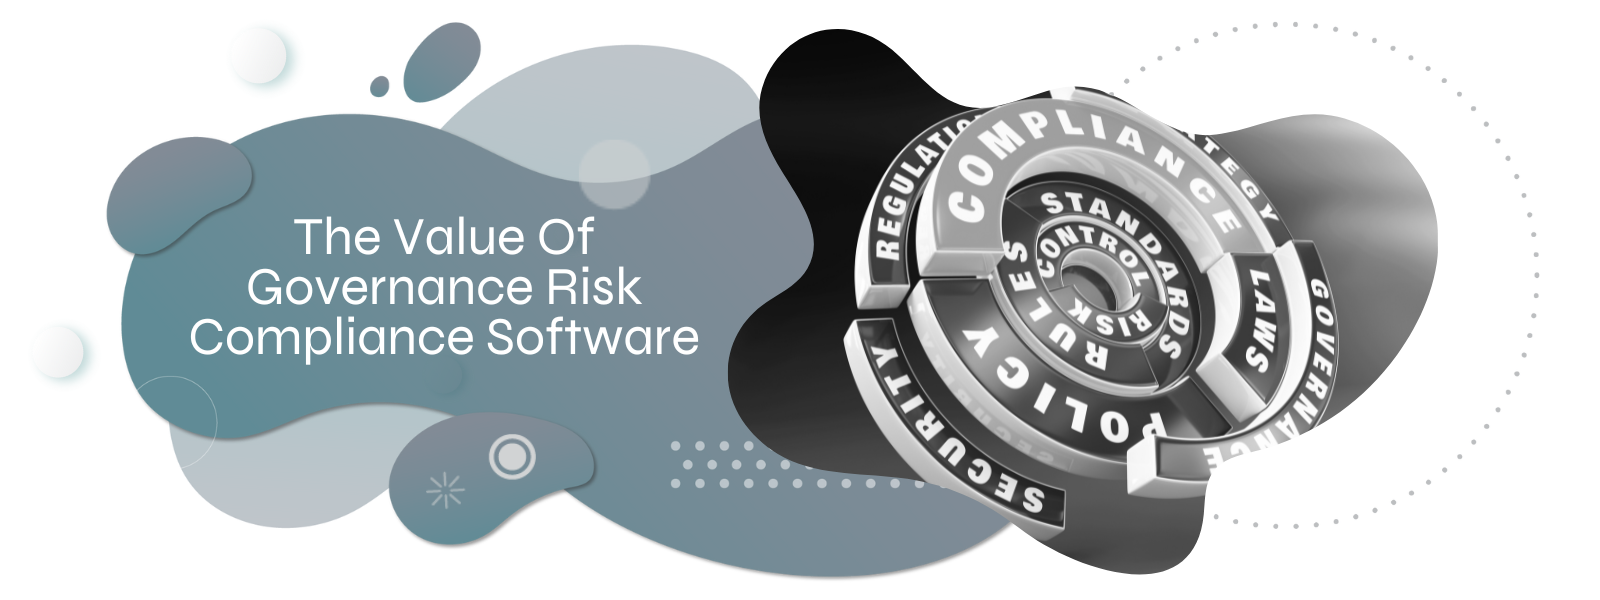 The Value Of Governance Risk Compliance Software